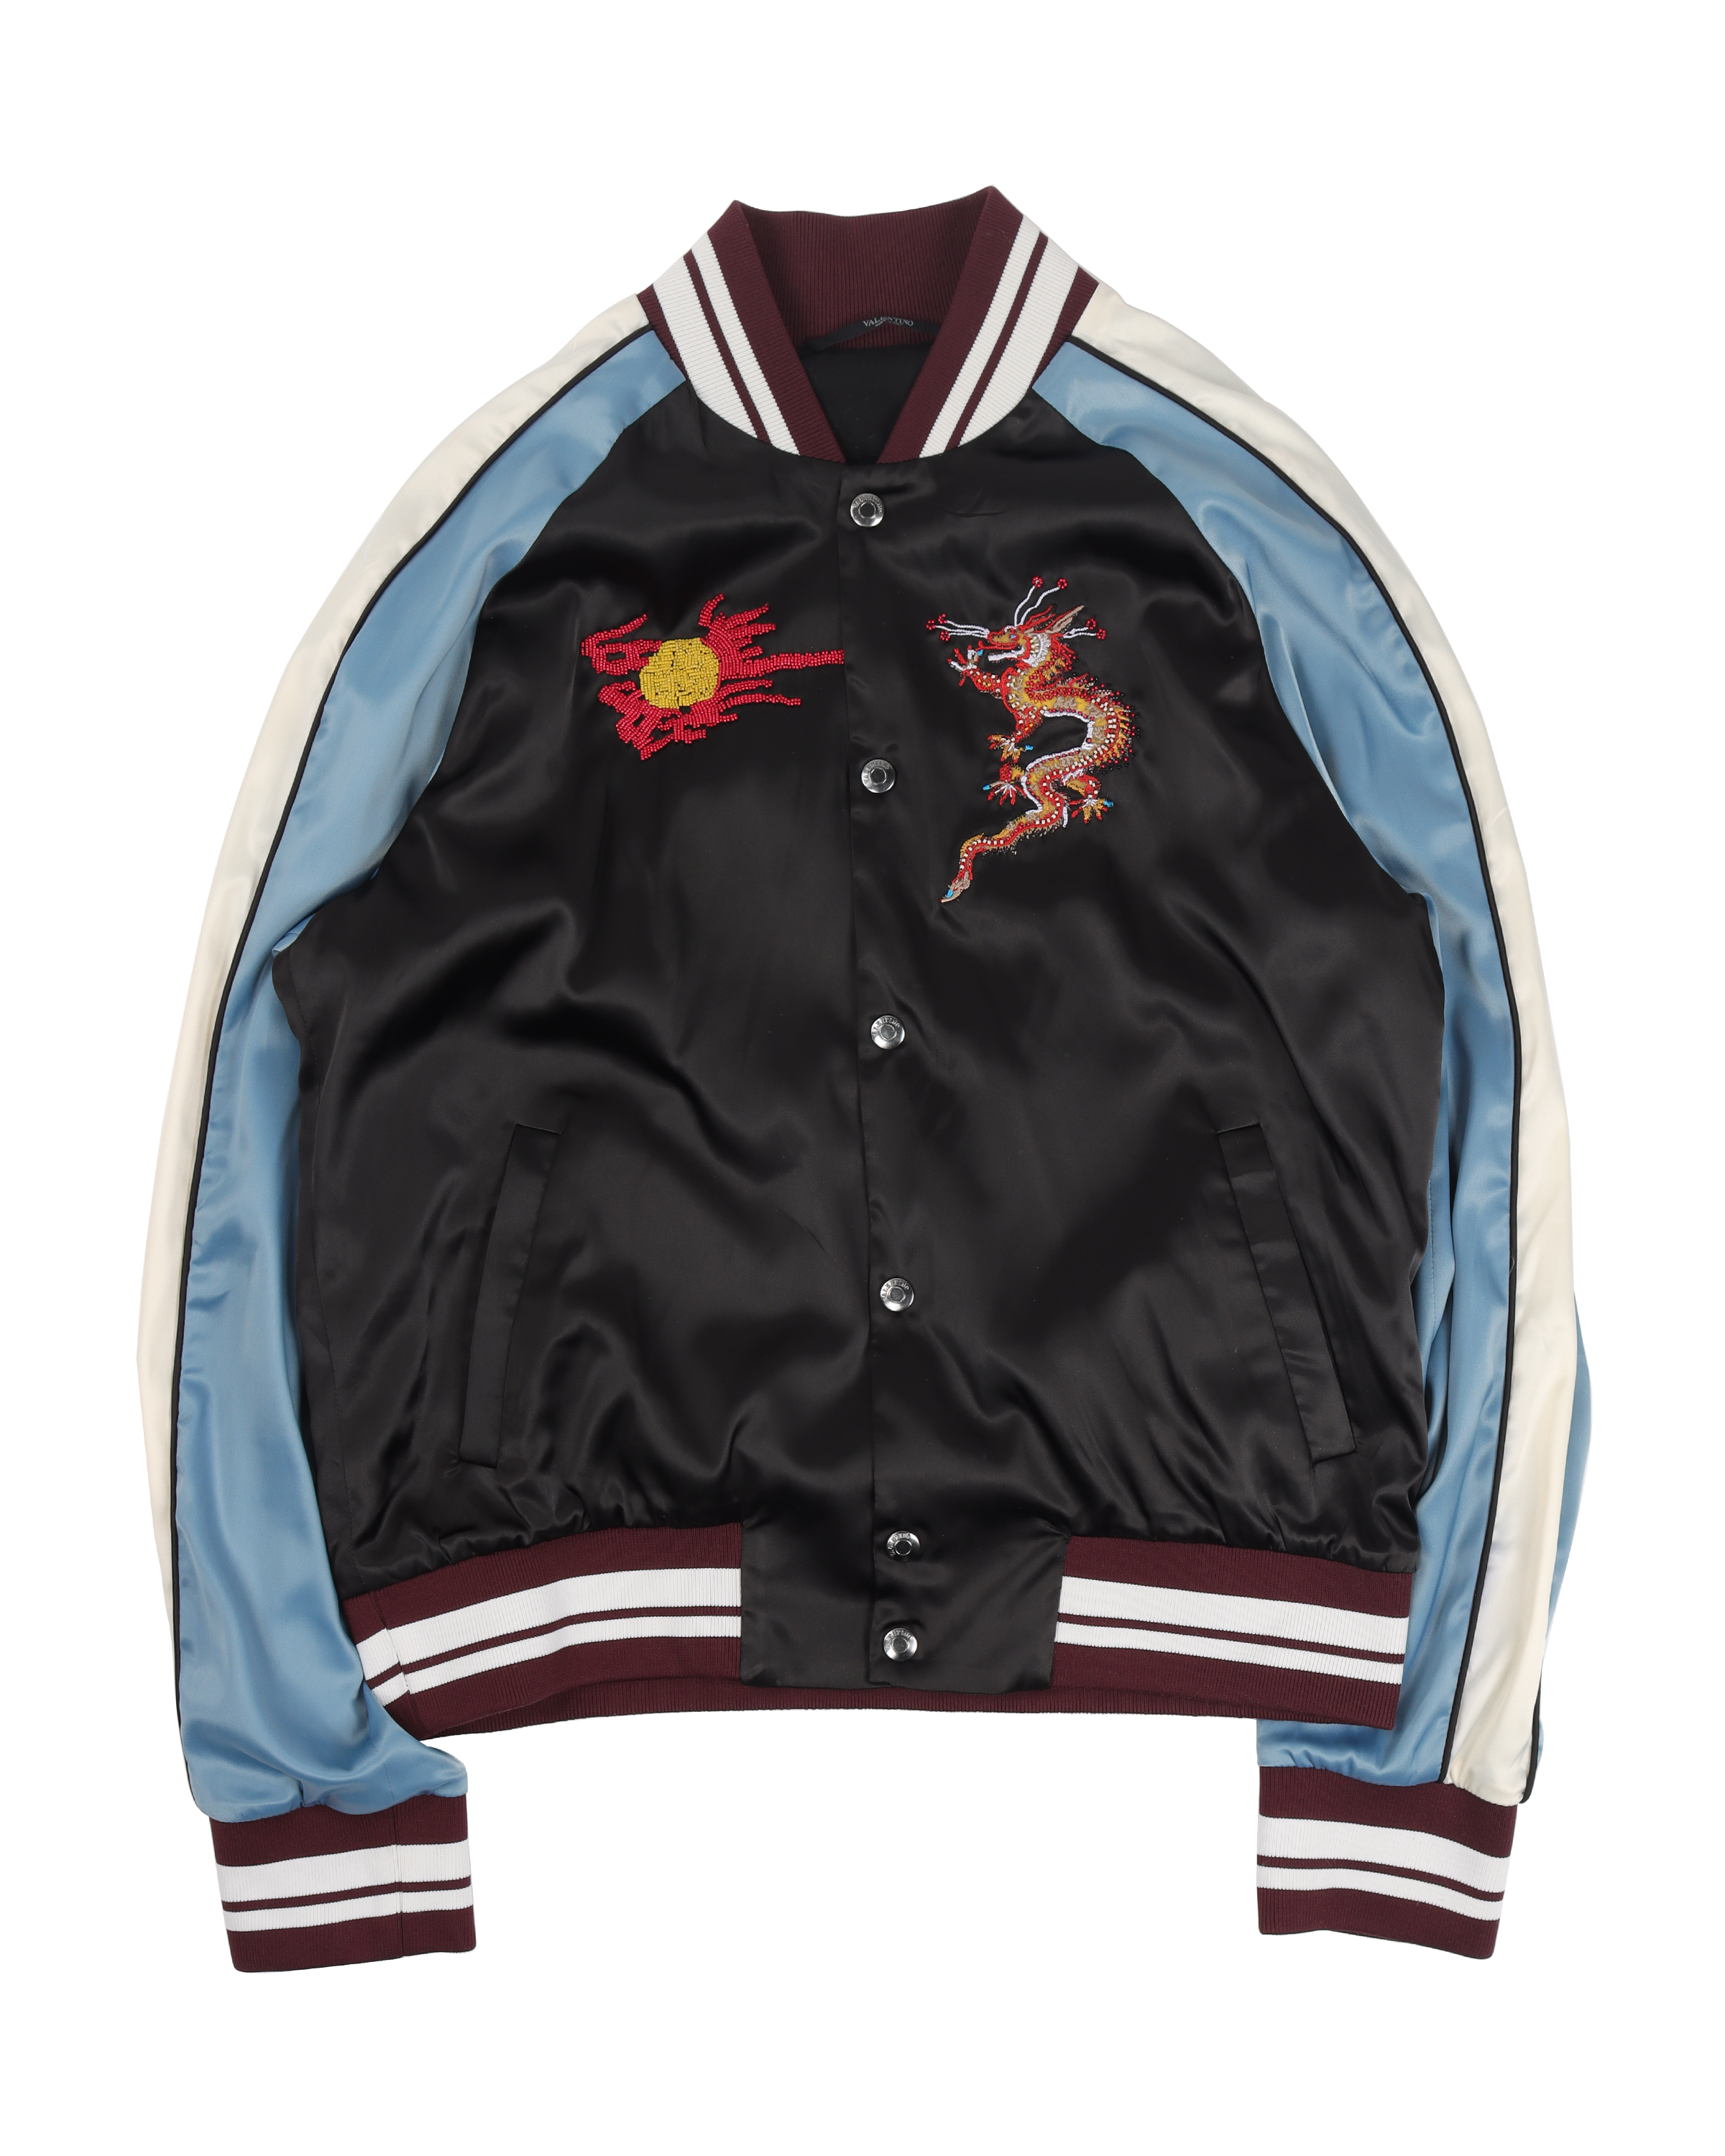 Embroidered Souvenir Funky Dragon Jacket